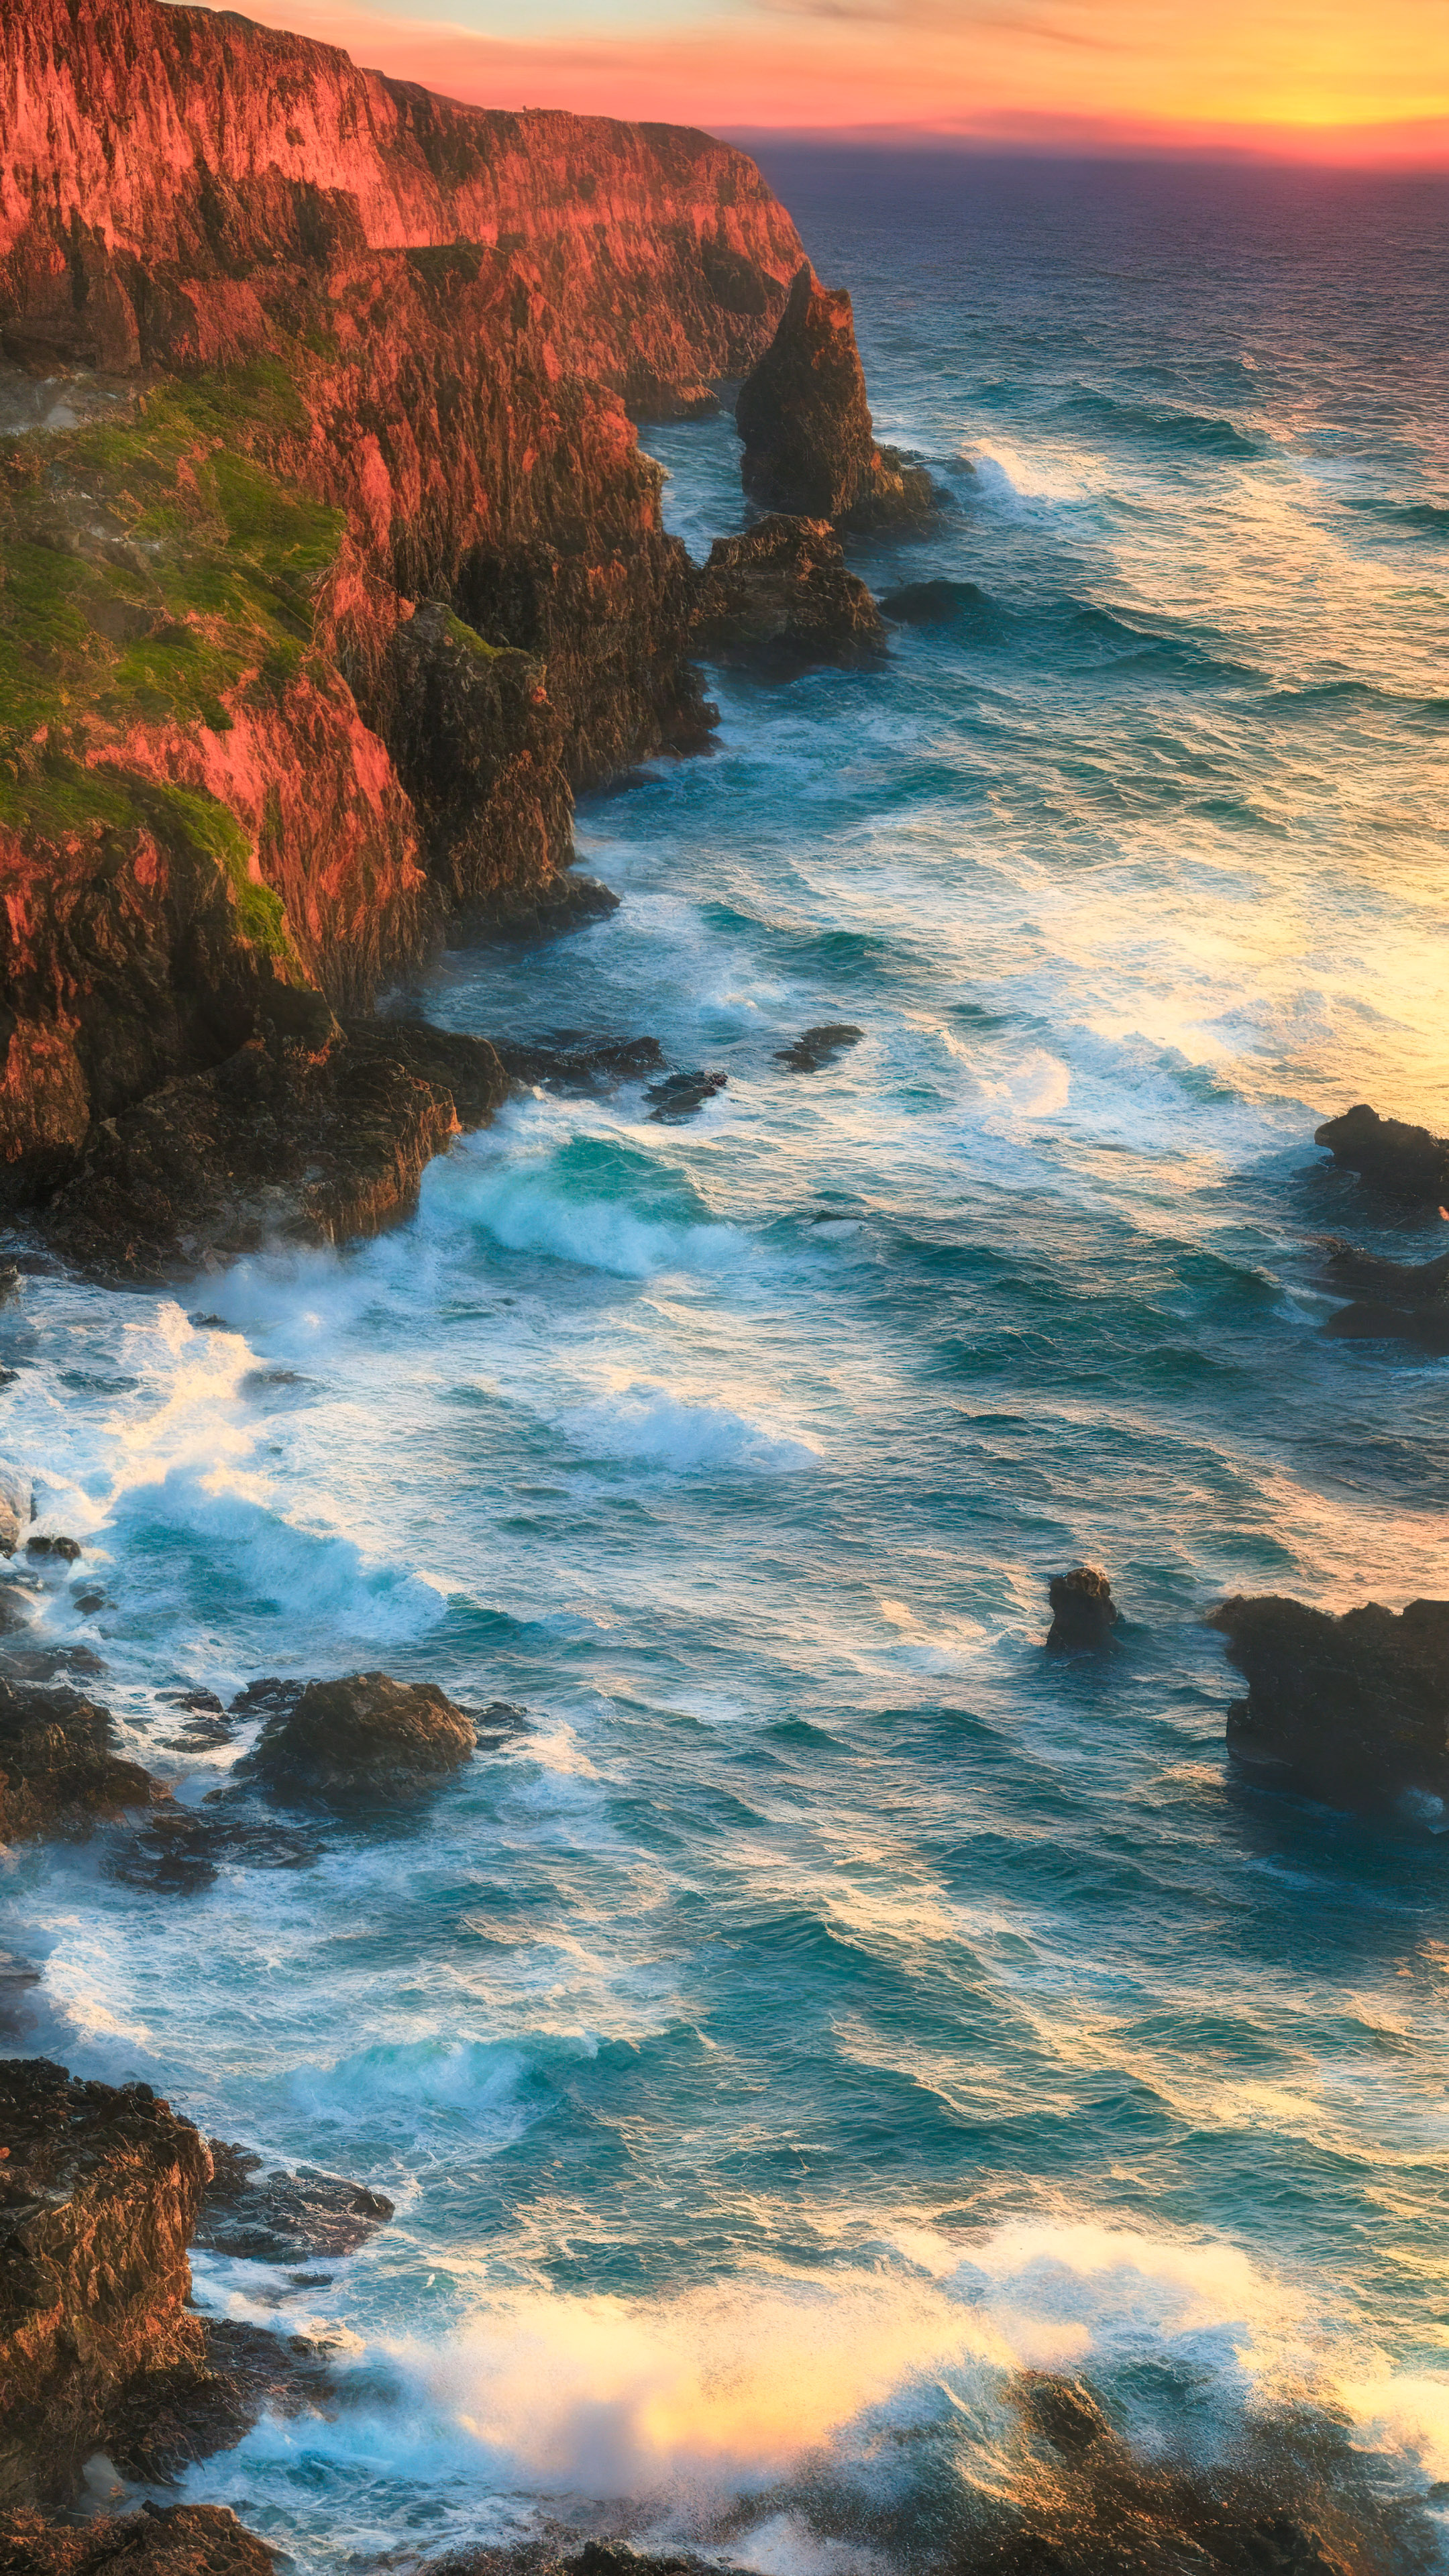 A stunning coastal view unfolds in our beautiful landscape in 4K, where rugged cliffs meet crashing waves under a fiery sunset.